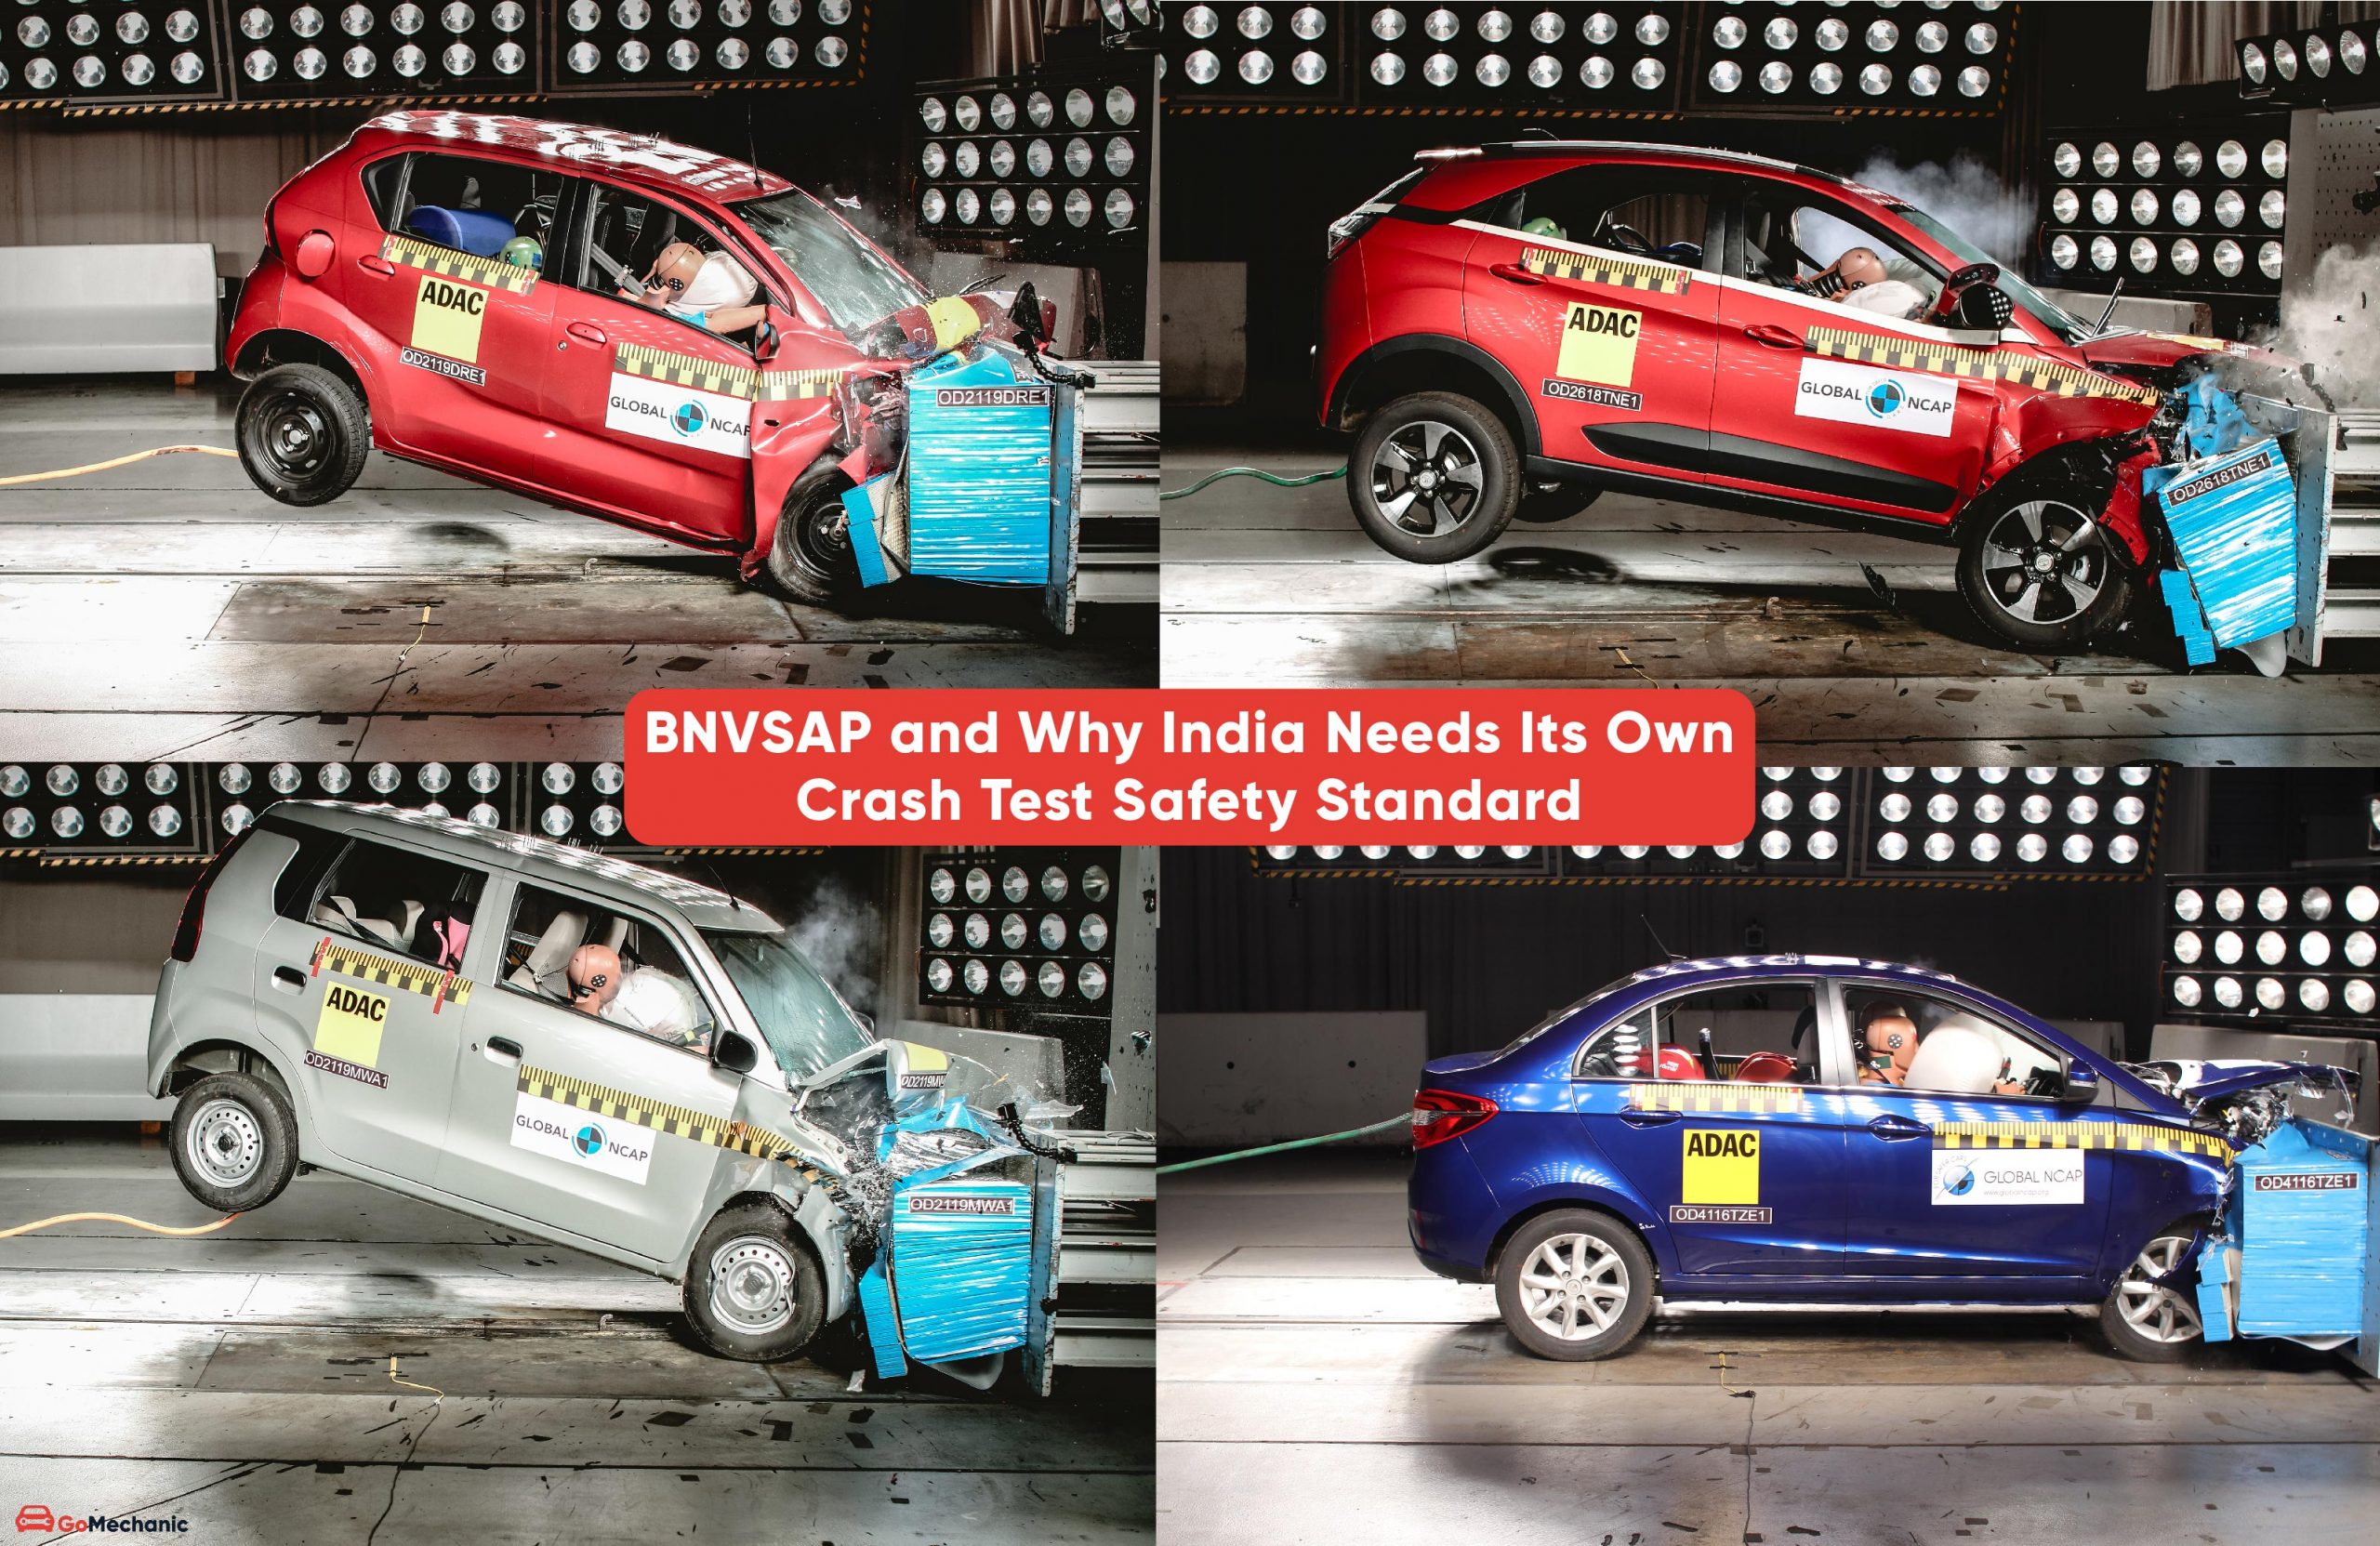 BNVSAP and Why India Needs Its Own Crash Test Safety Standard